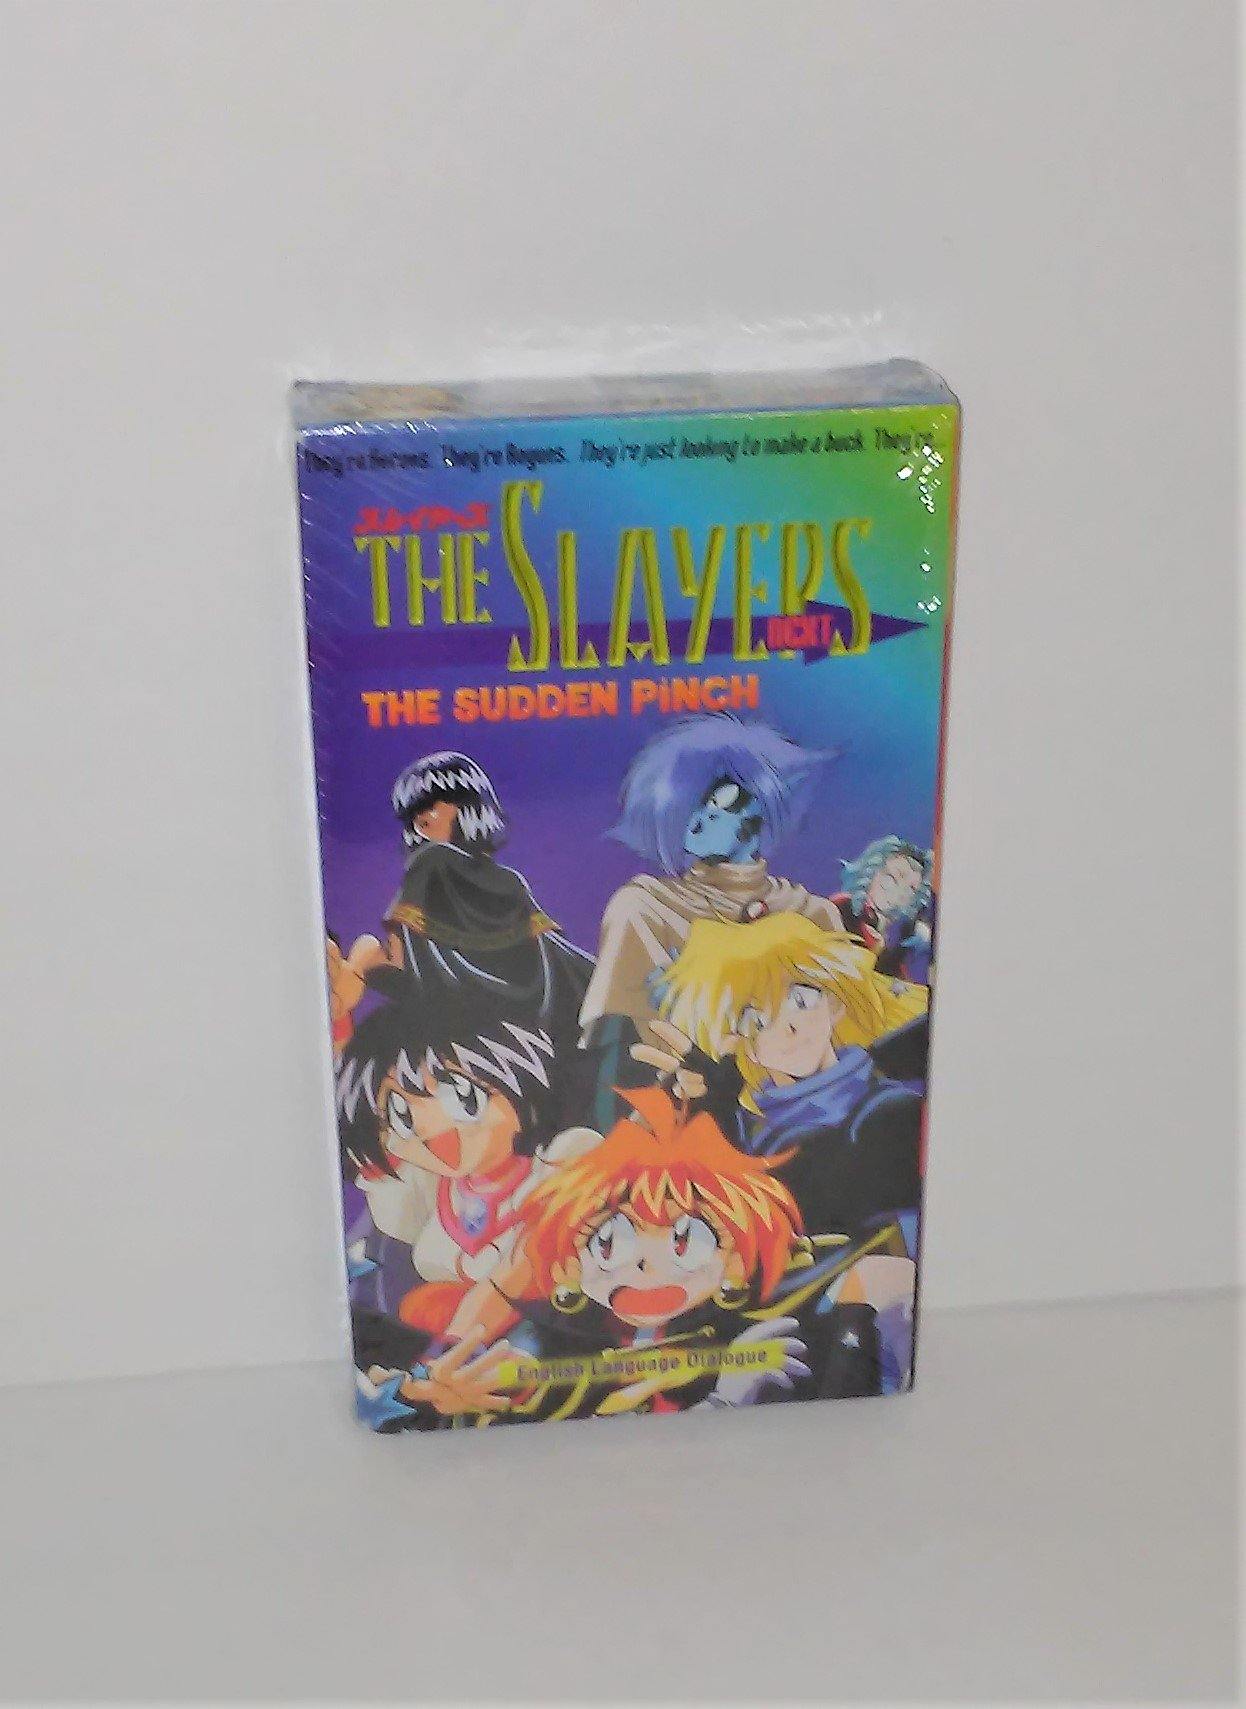 The Slayers Next THE SUDDEN PINCH VHS Anime Video 1999 Episodes 27-29  English Dialogue